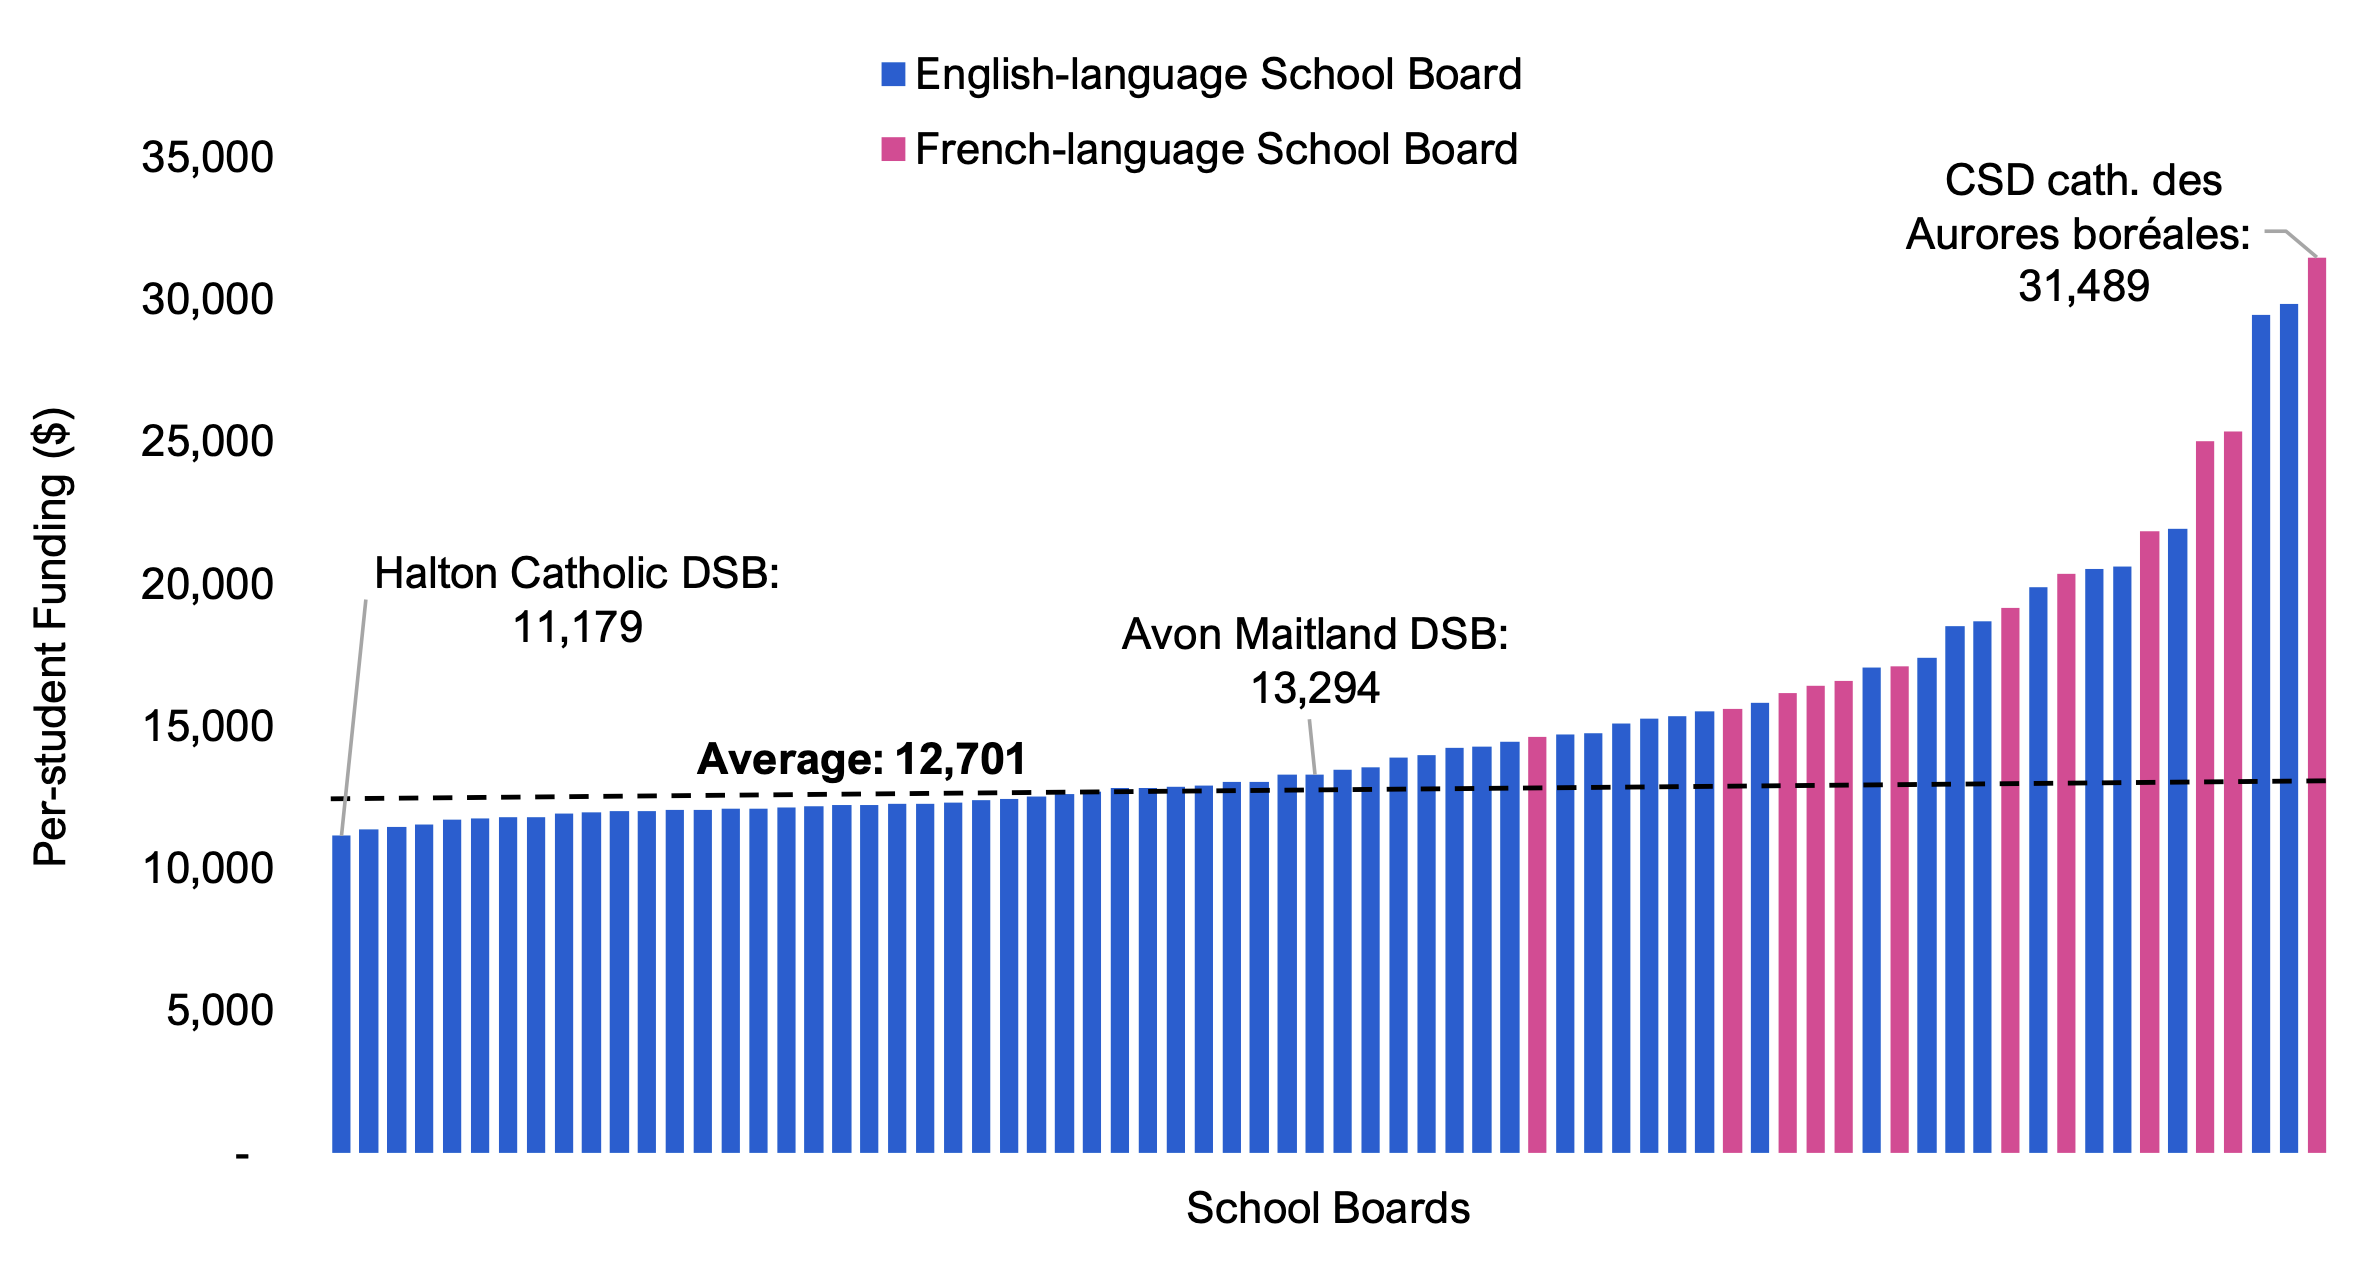 Figure 4.8 shows per-student GSN funding by school board, broken down by English-language and French-language. The values range from a low of $11,179 for the Halton Catholic DSB to a high of $31,489 for the CSD catholique des Aurores boréales, with an overall average of $12,701. On average, French-language school boards received higher per-student GSN funding than English-language school boards.